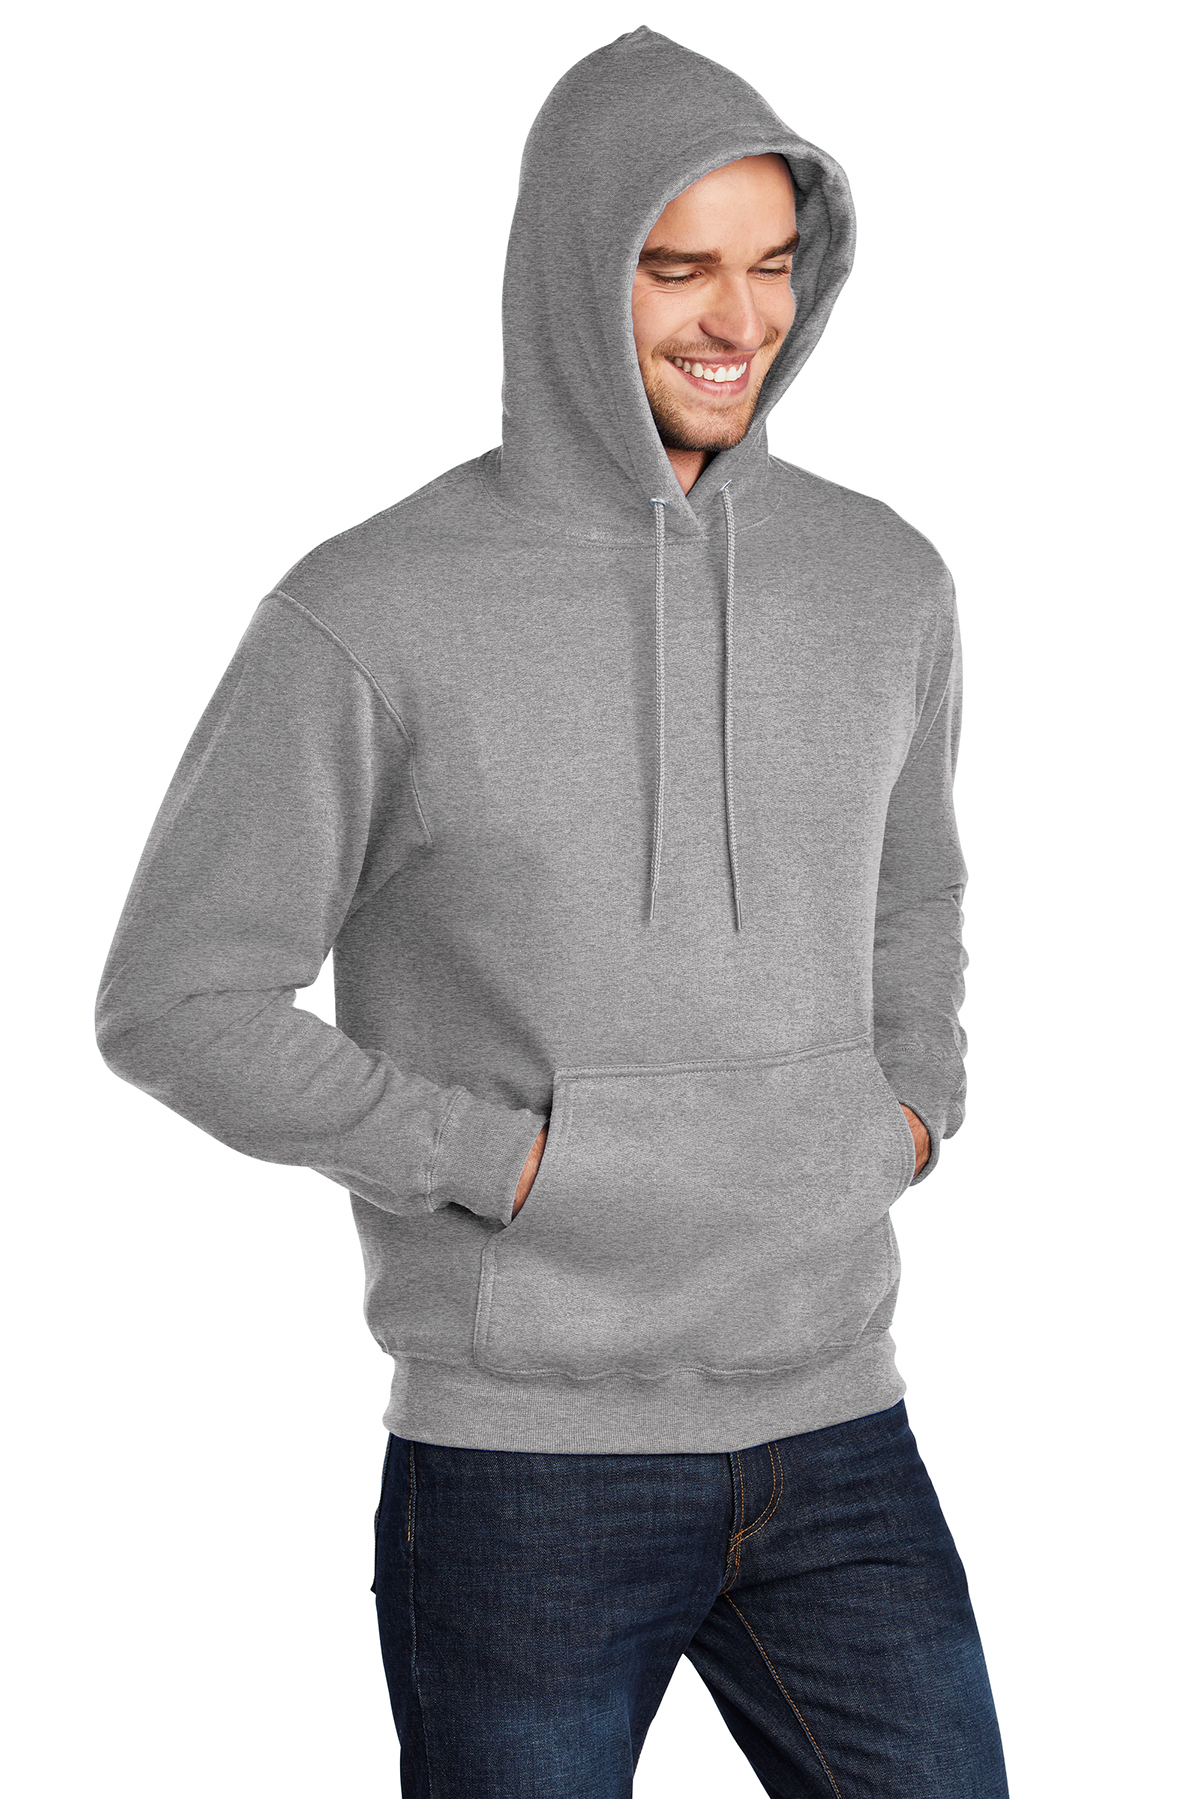 The BMW Store - Port & Company Core Fleece Pullover Hooded Sweatshirt White - Black BMW FC - DTF